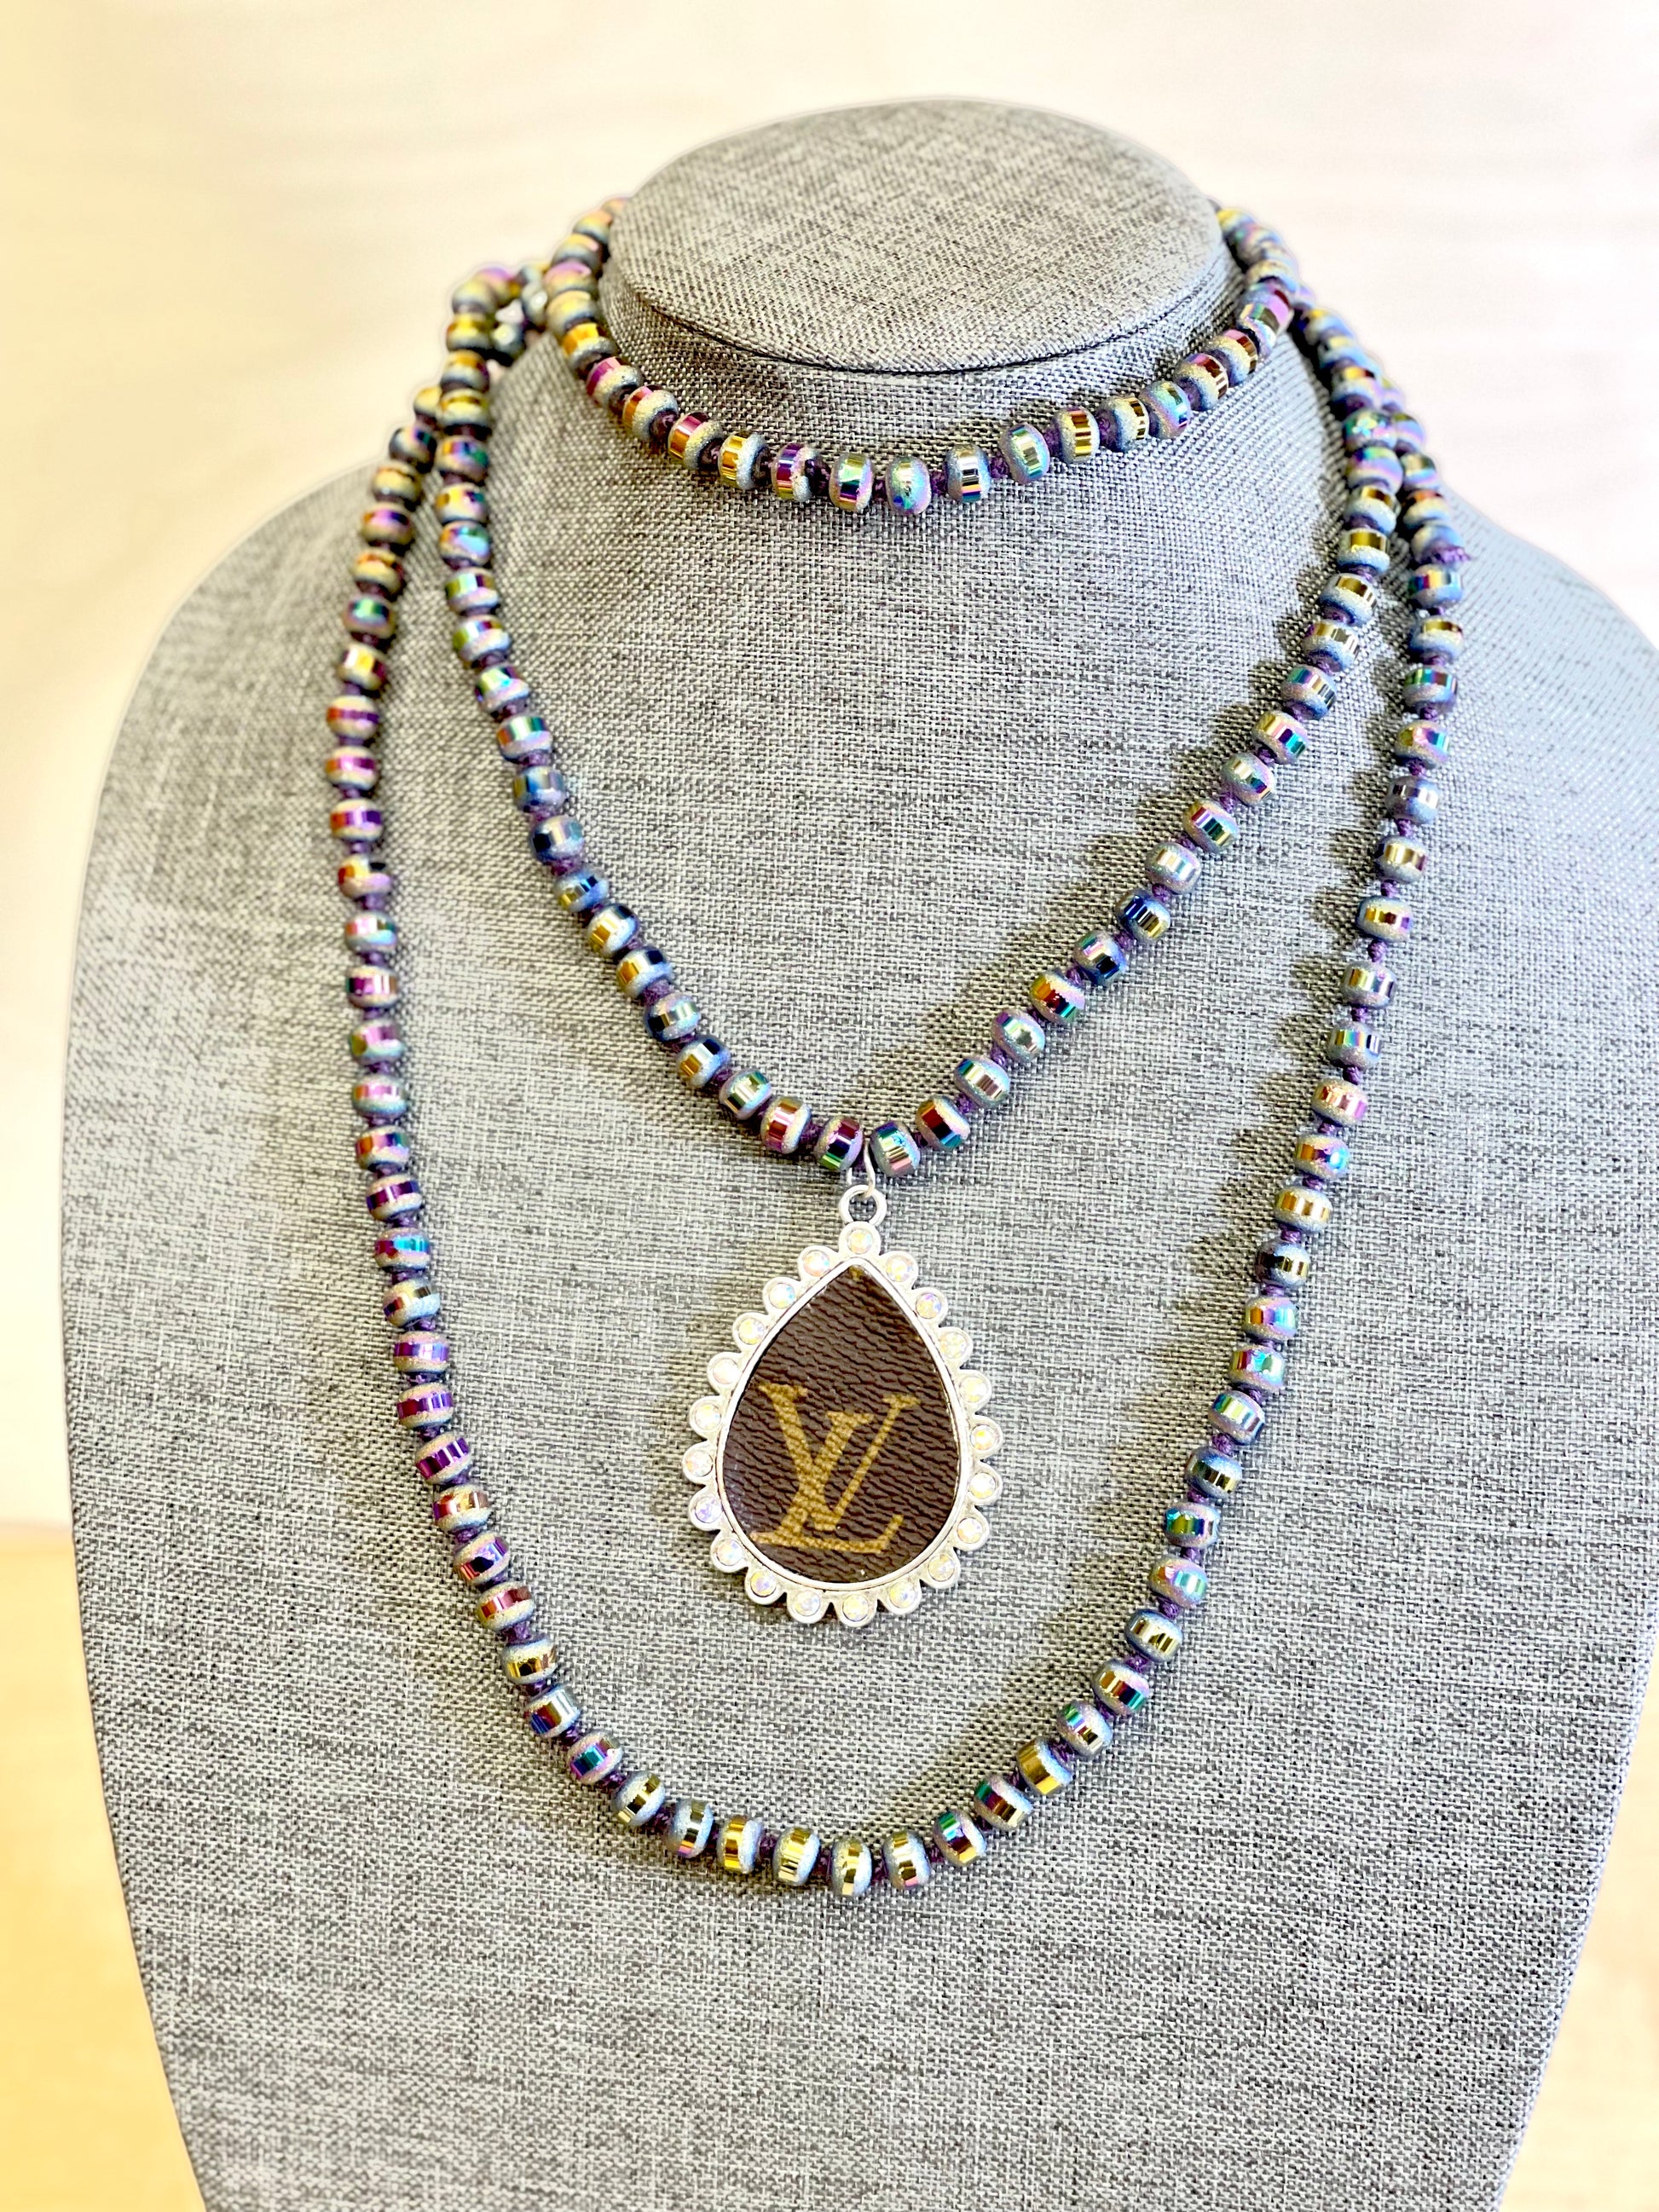 Iridescent rainbow necklace with large teardrop pendant - Patches Of Upcycling